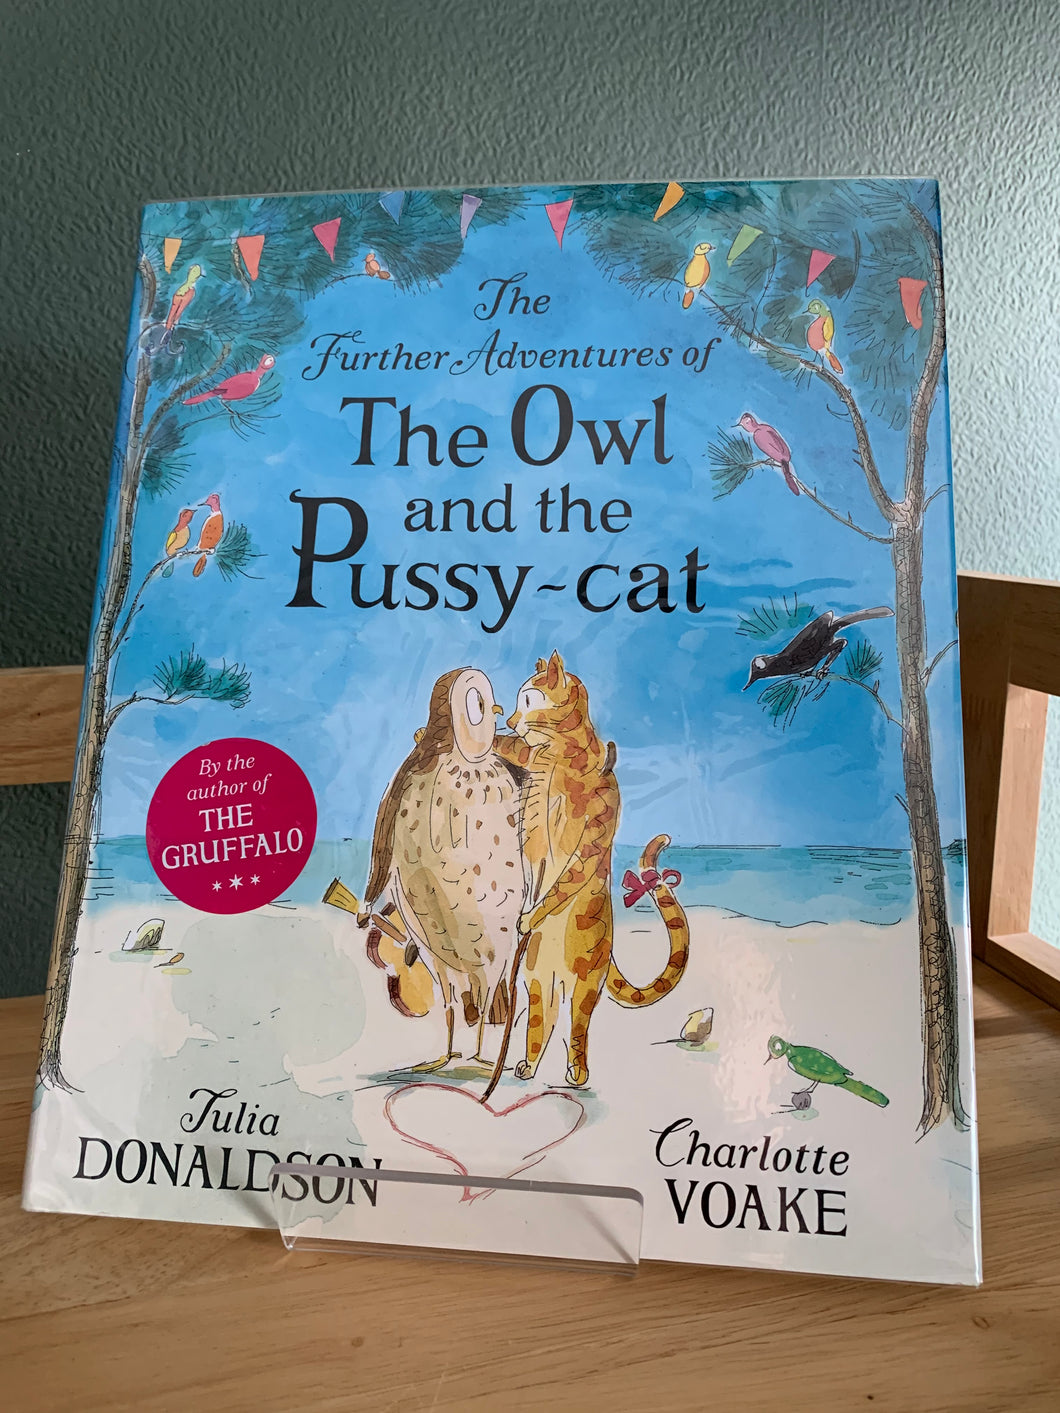 The Further Adventures of The Owl and the Pussy-cat